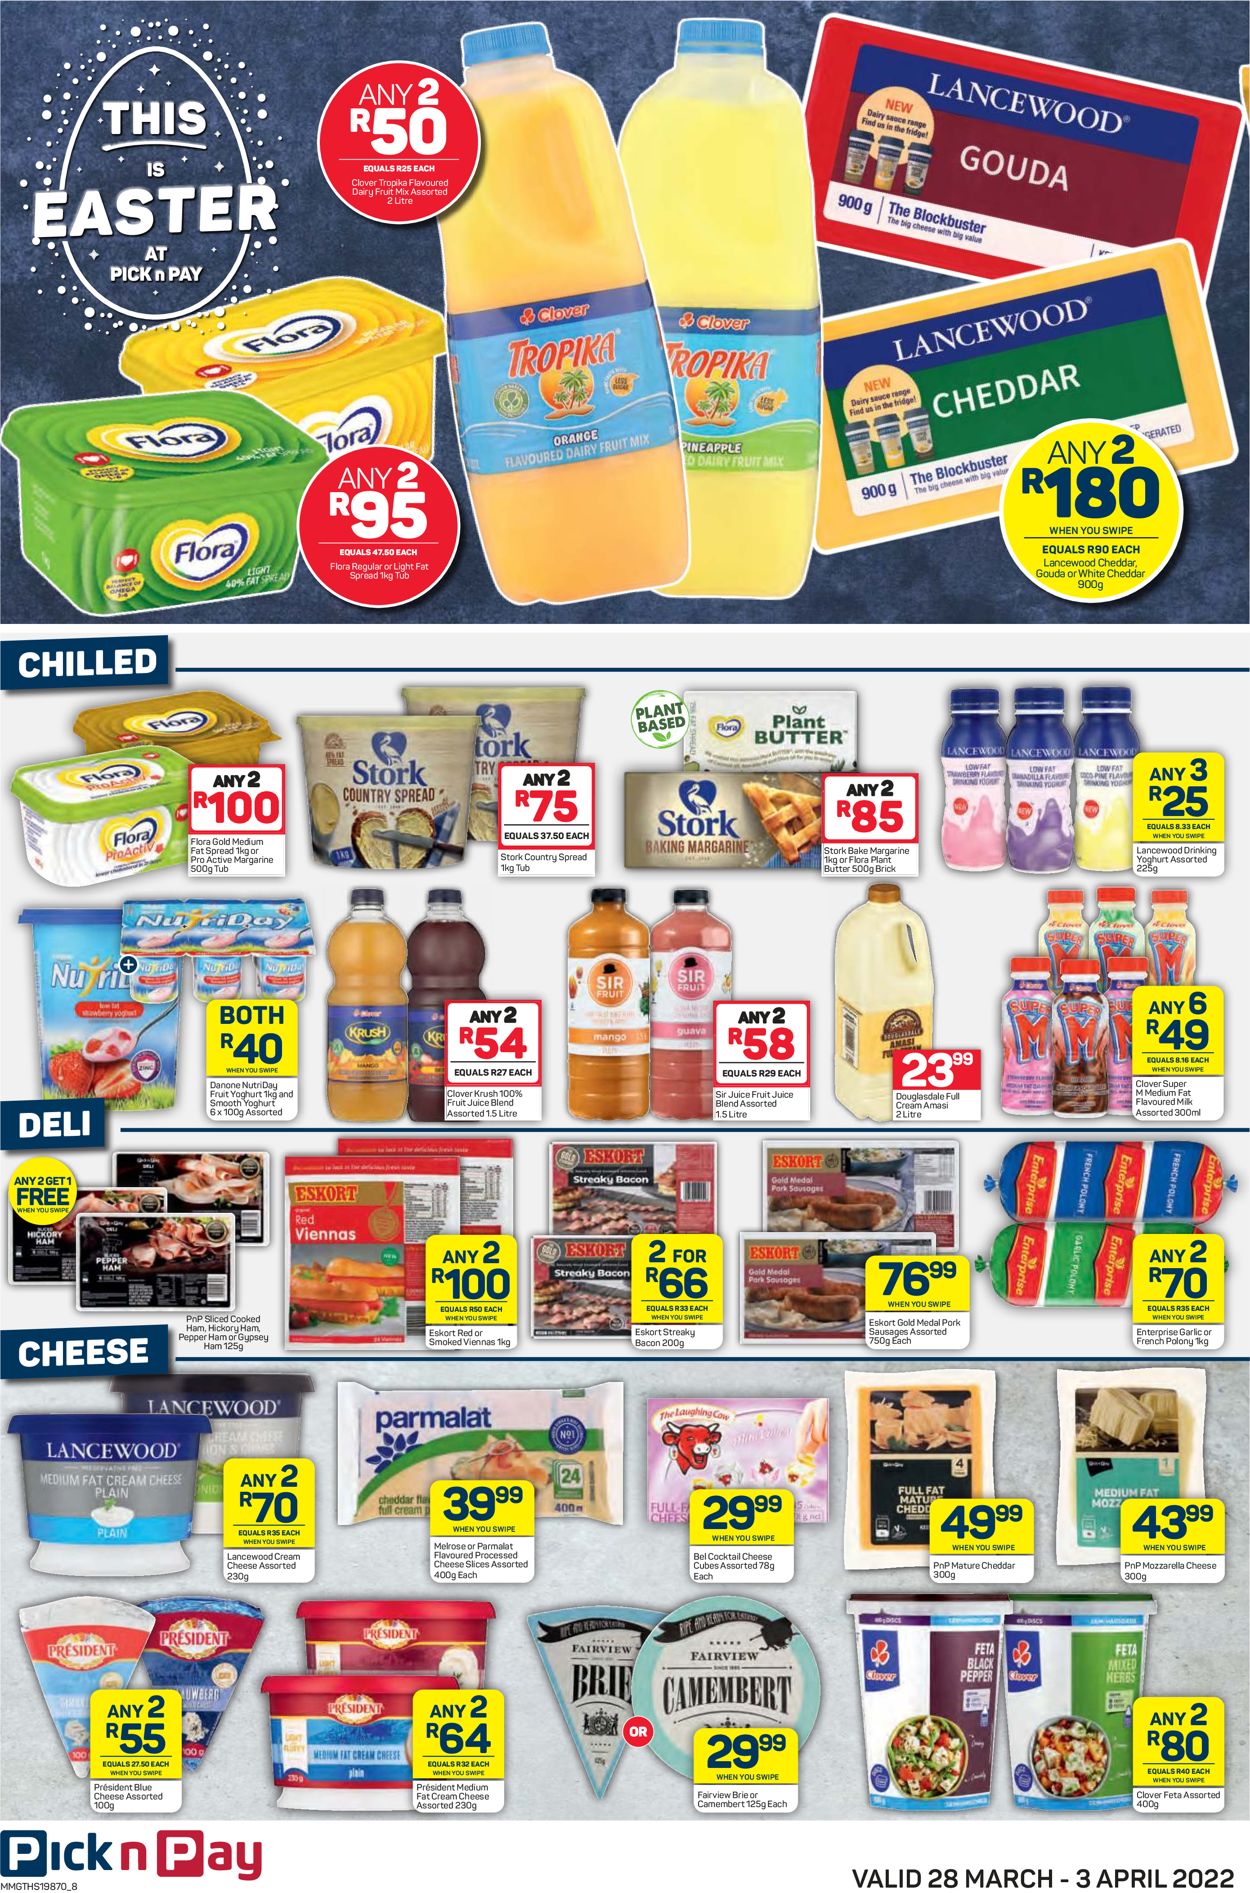 Pick n Pay EASTER 2022 Catalogue - 2022/03/28-2022/04/03 (Page 8)